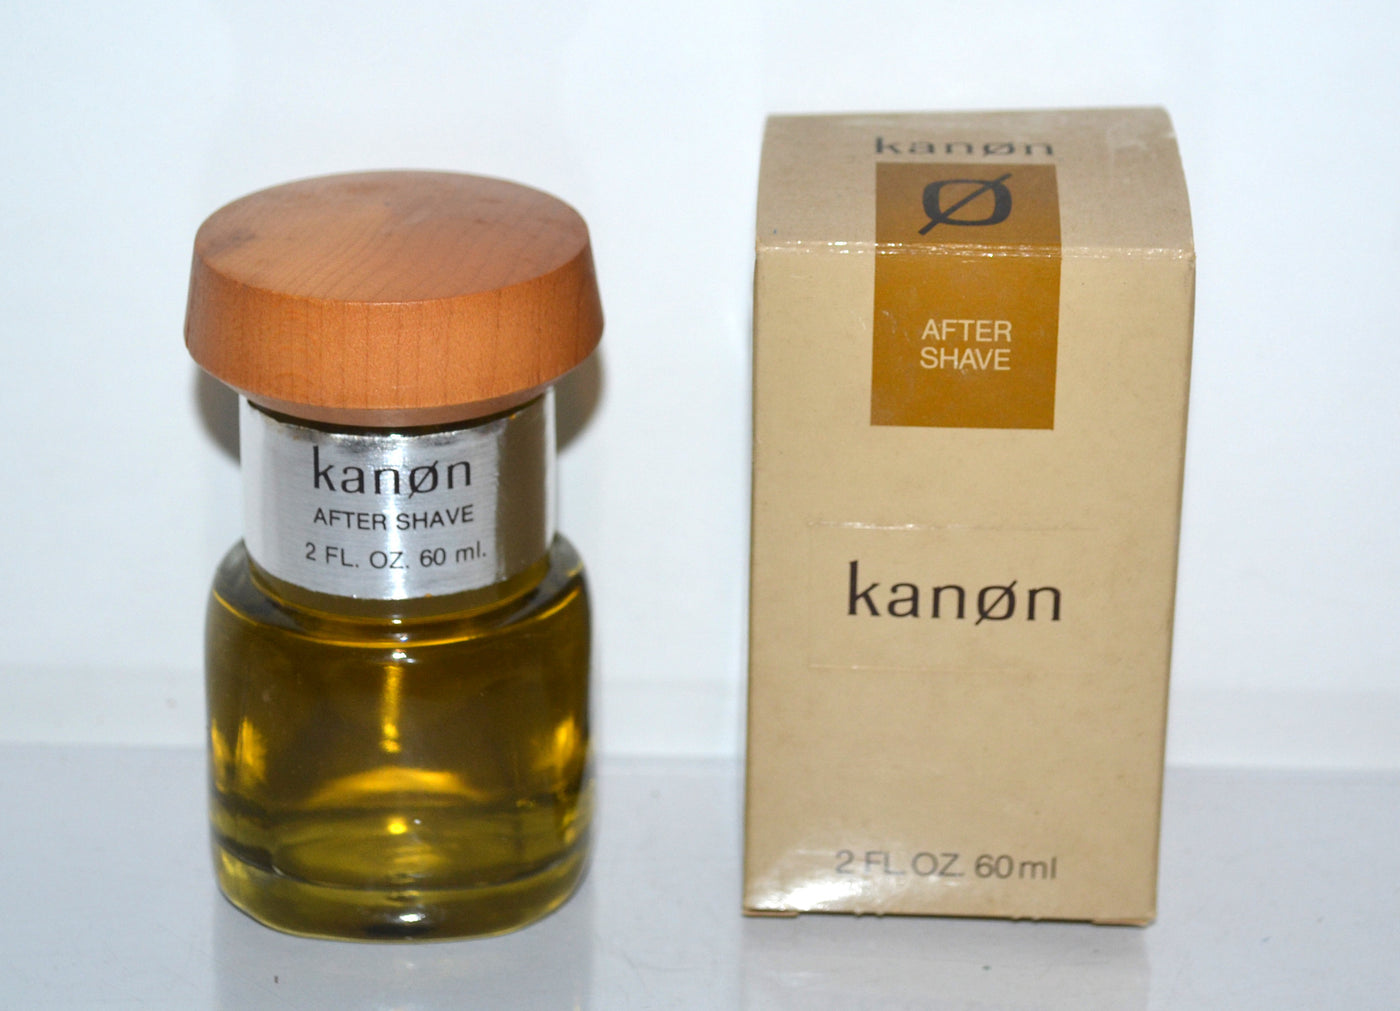  Kanon After Shave